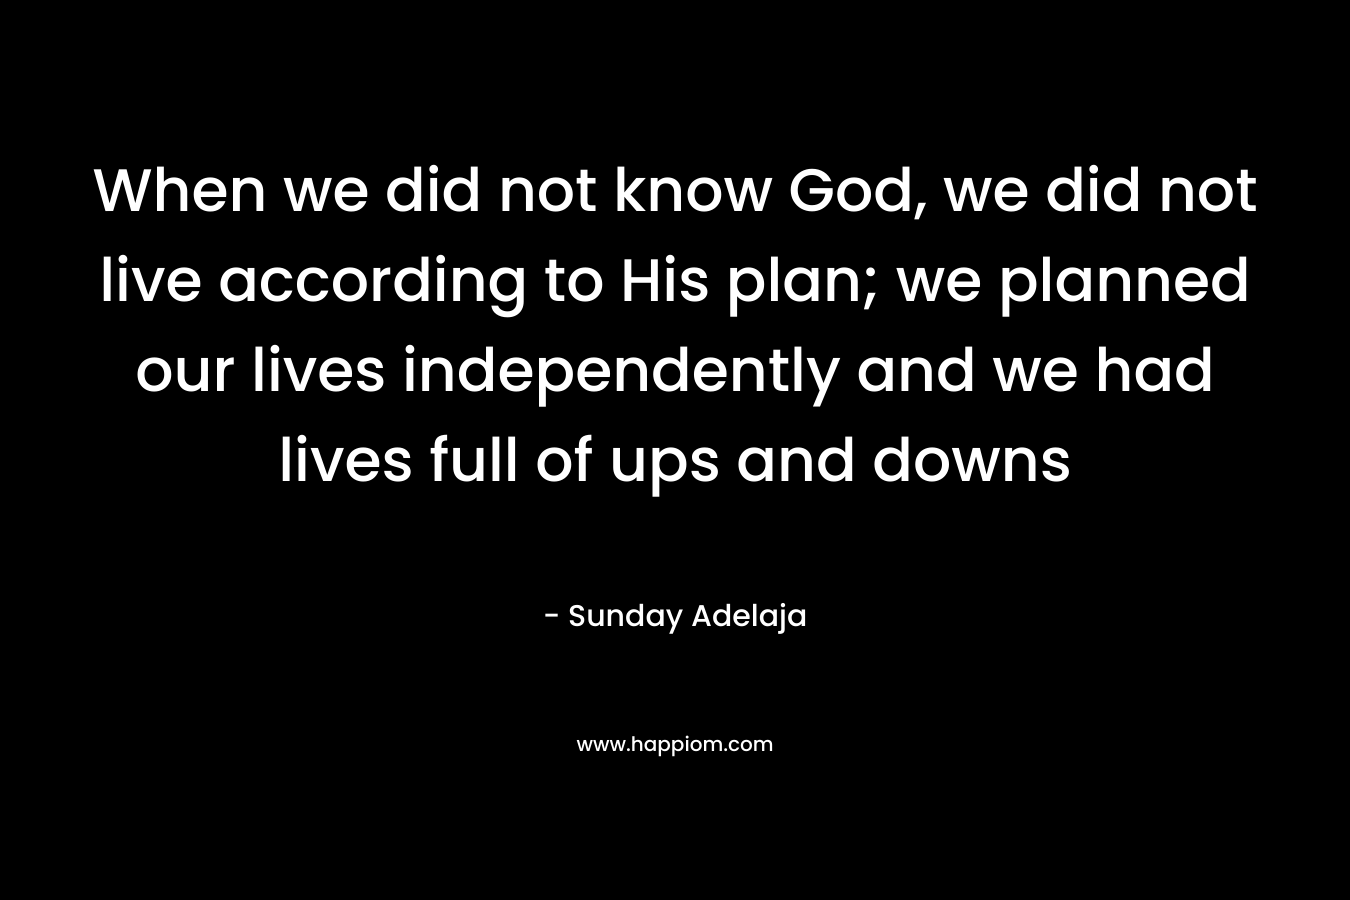 When we did not know God, we did not live according to His plan; we planned our lives independently and we had lives full of ups and downs